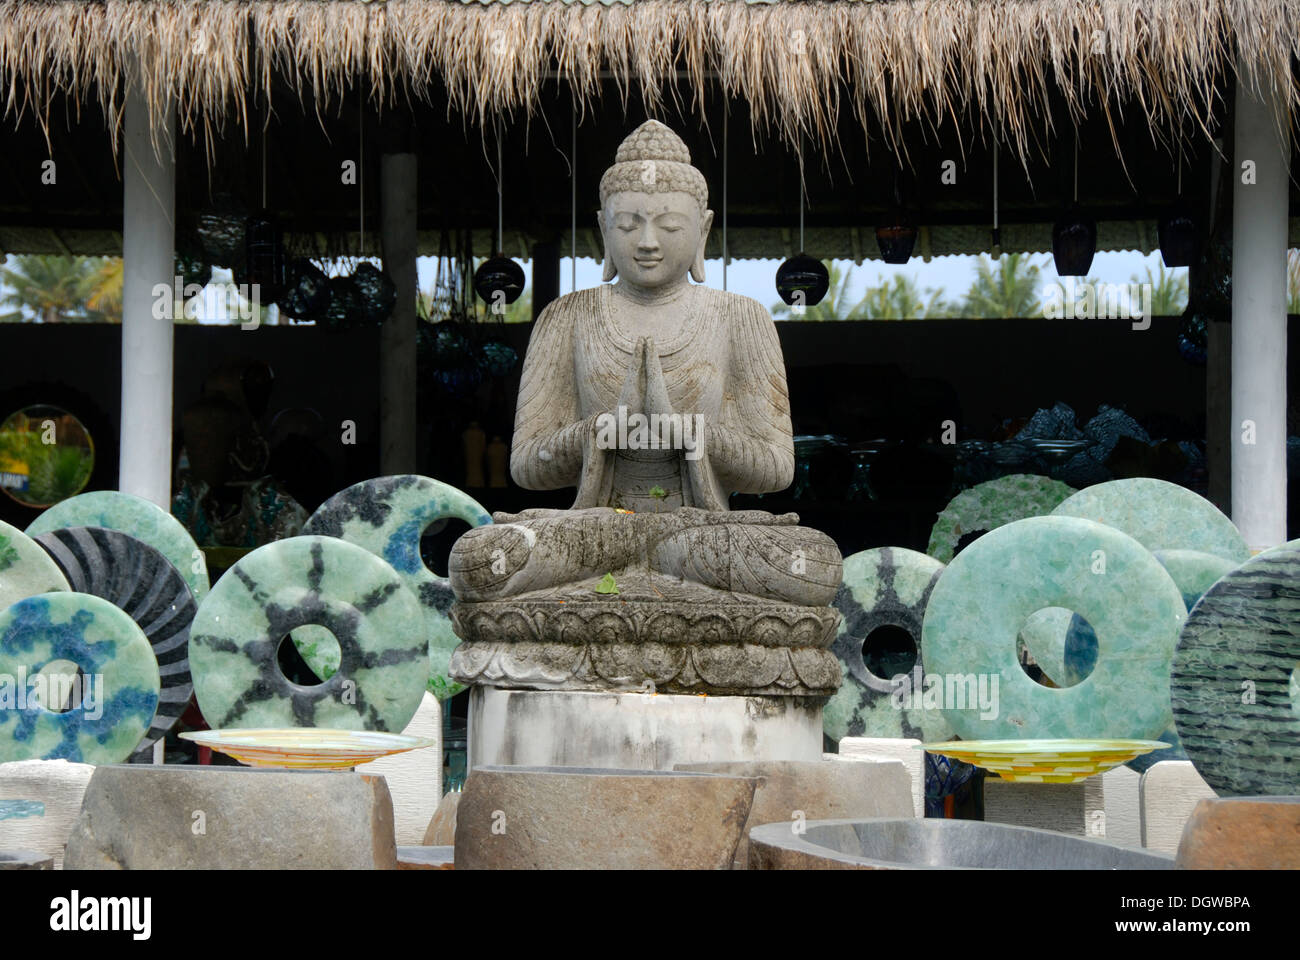 Stone sculptures, souvenirs, Buddha statue in meditation with blue stone rings on sale in shop, near Ubud, Bali, Indonesia Stock Photo